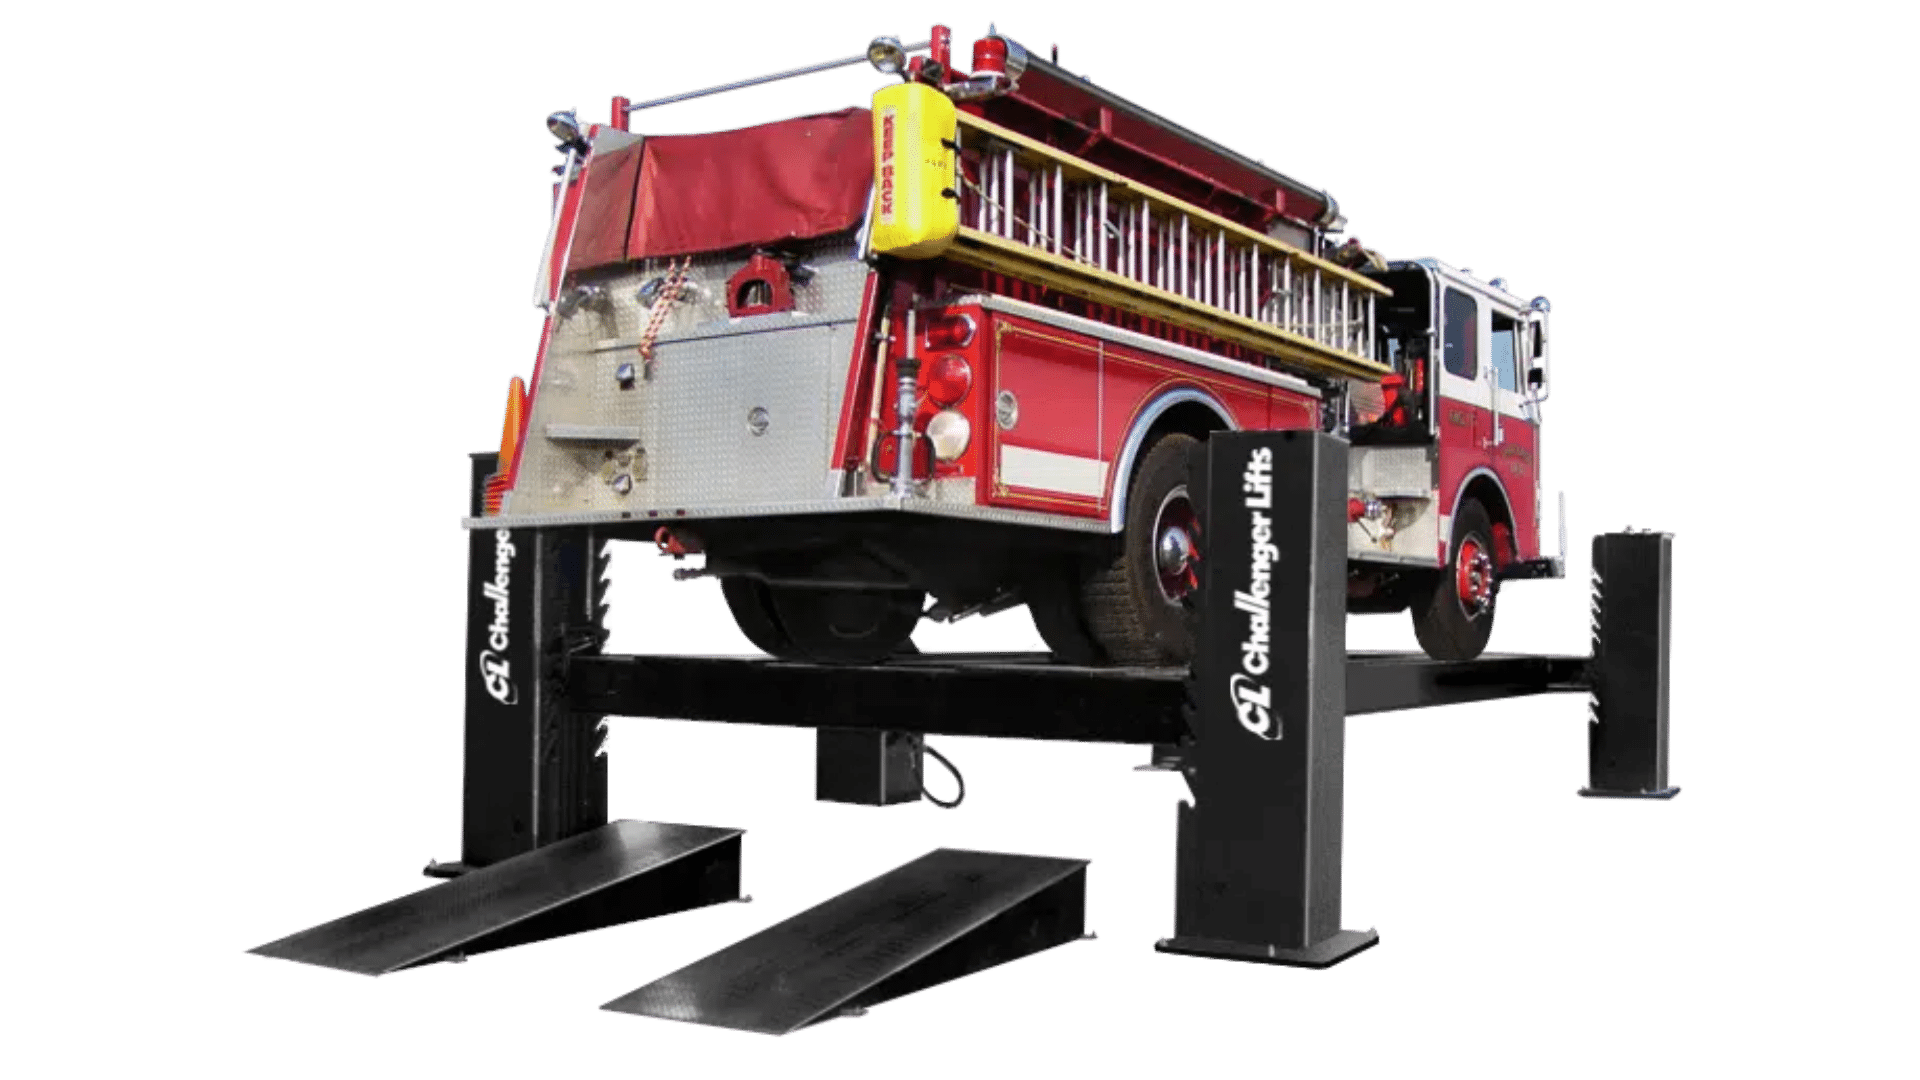 Challengers 44030 4post lift with red fire truck supported and on black columns